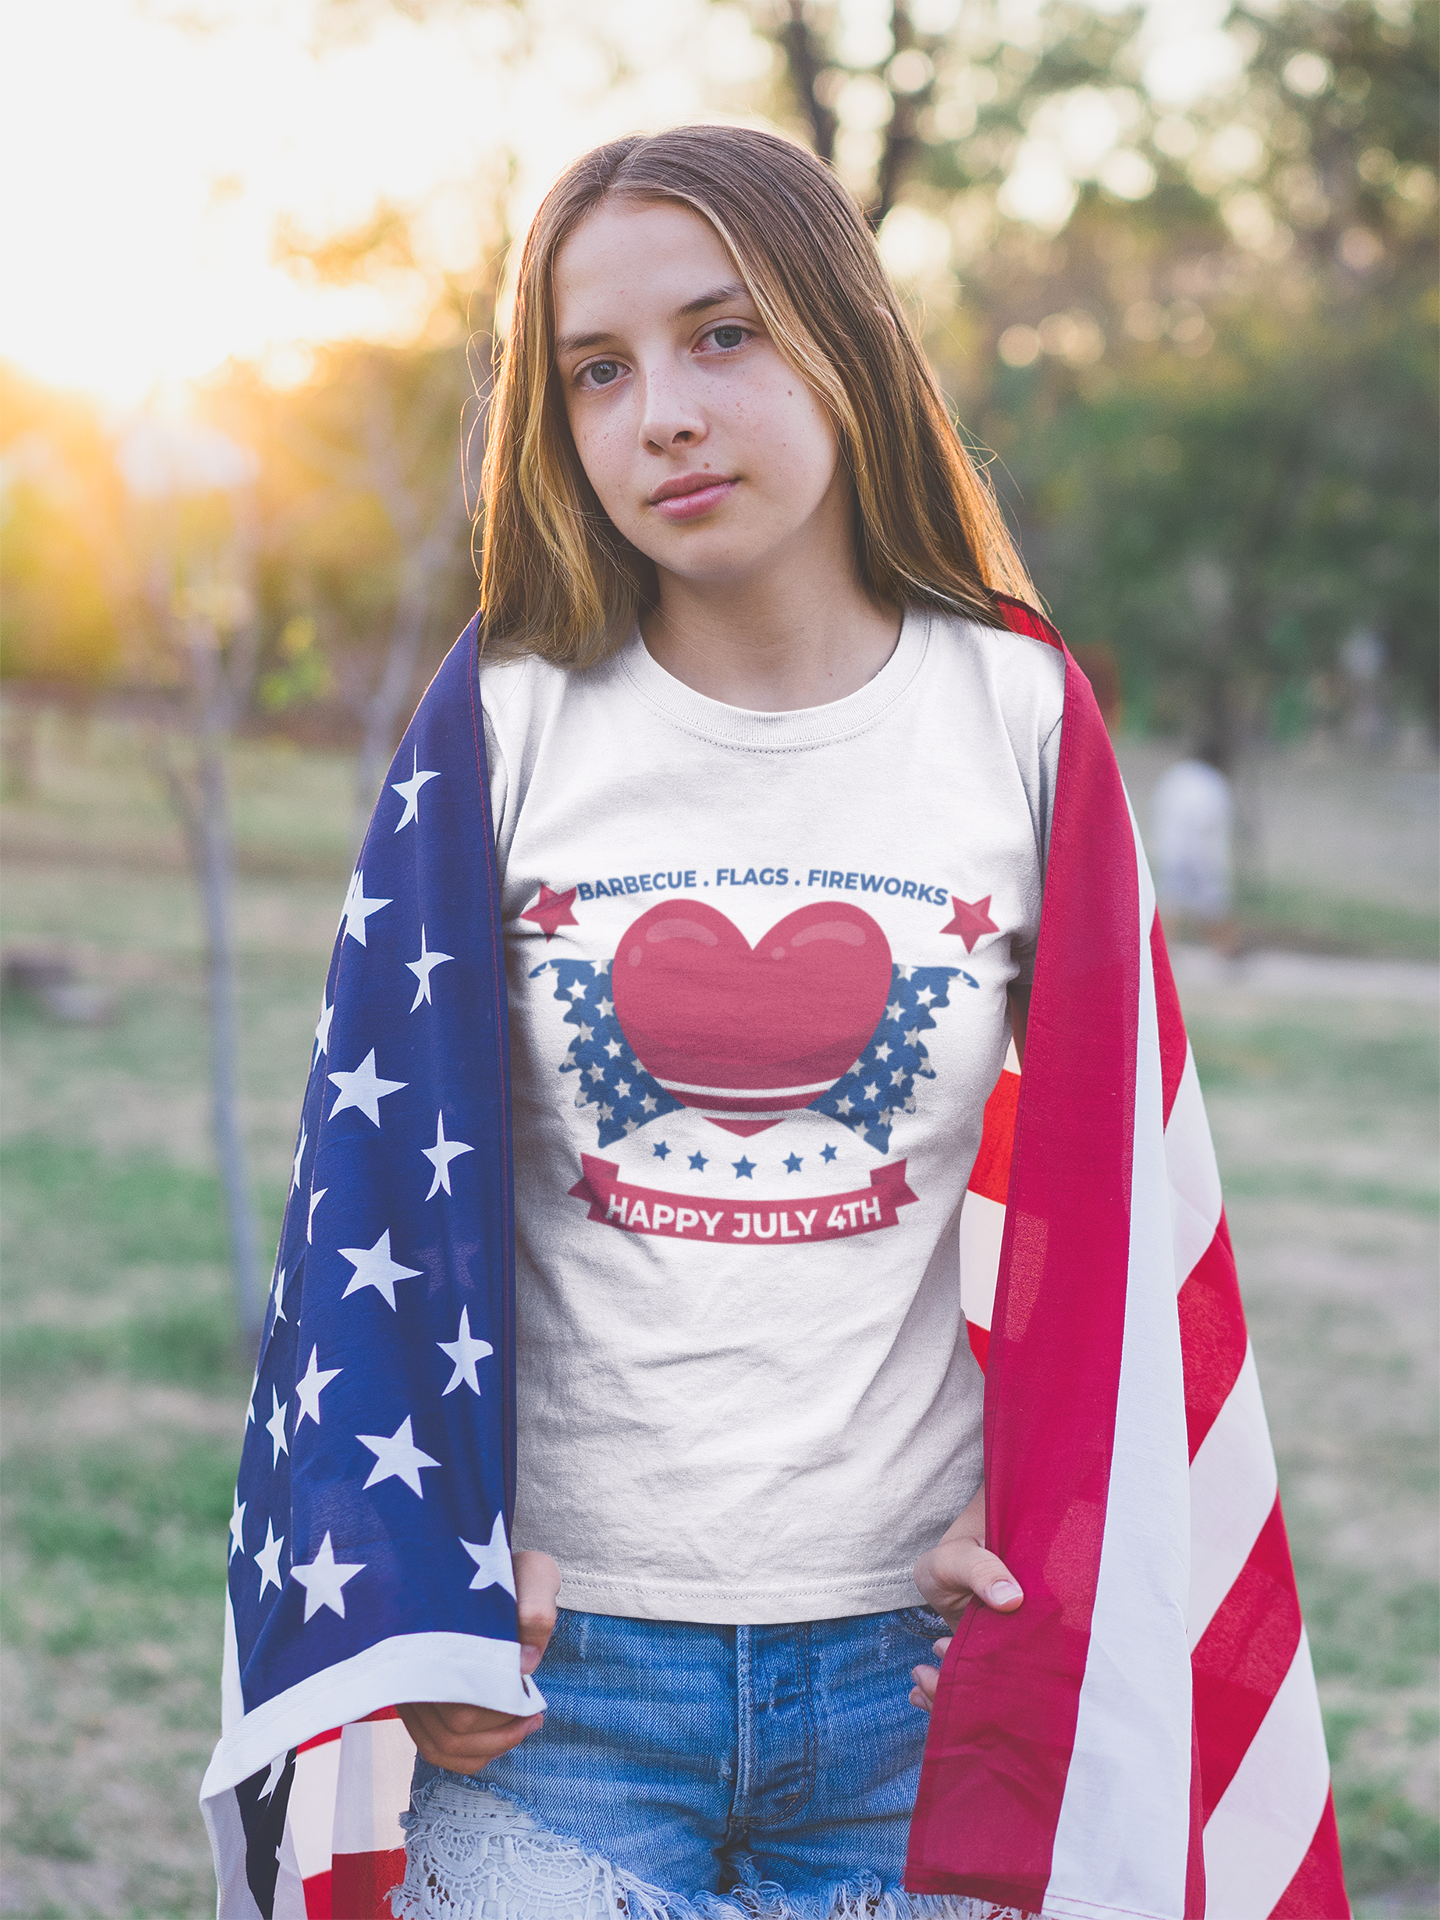 Barbecue Flags Fireworks Happy July 4th Youth Short Sleeve Tee